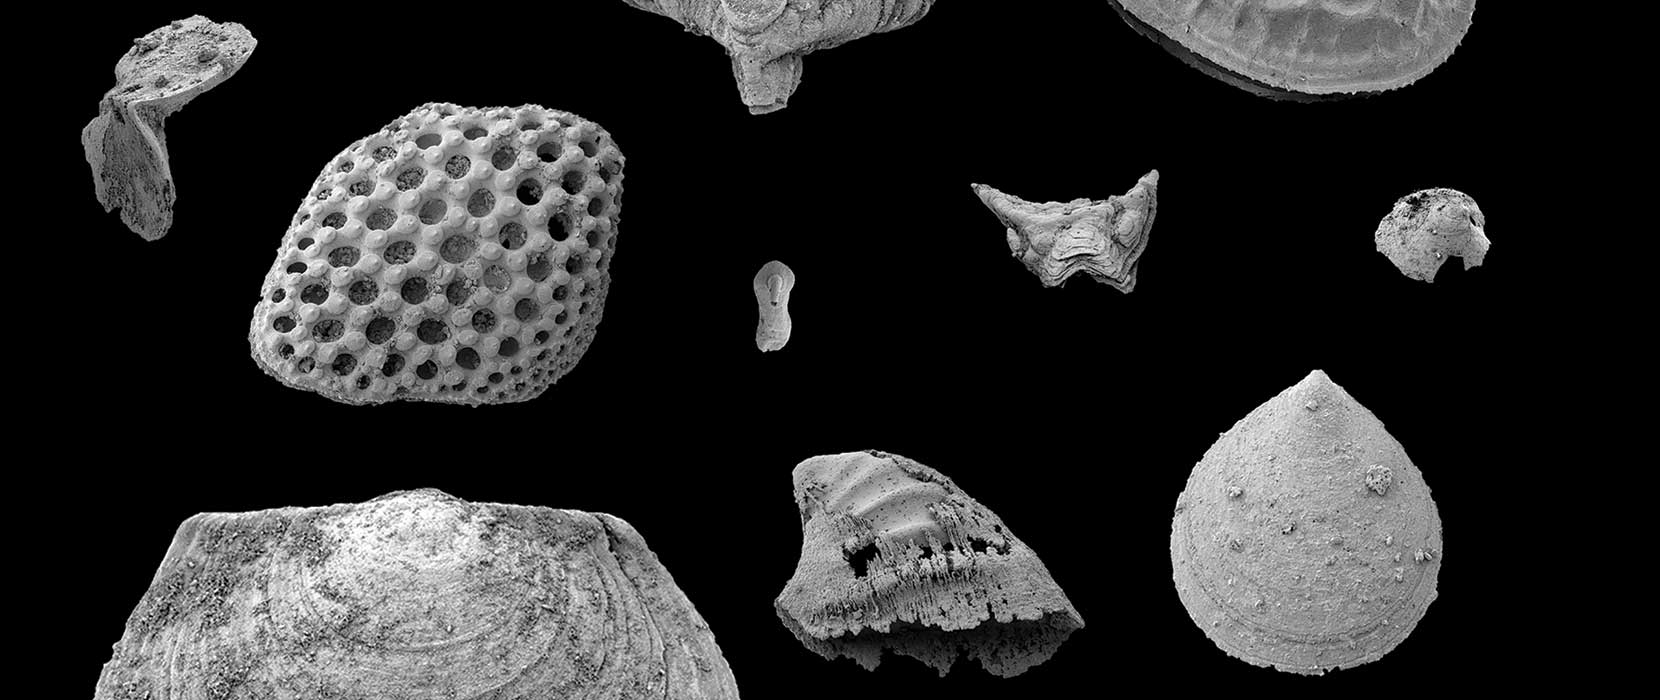 Black and white image of large and small fossil types.